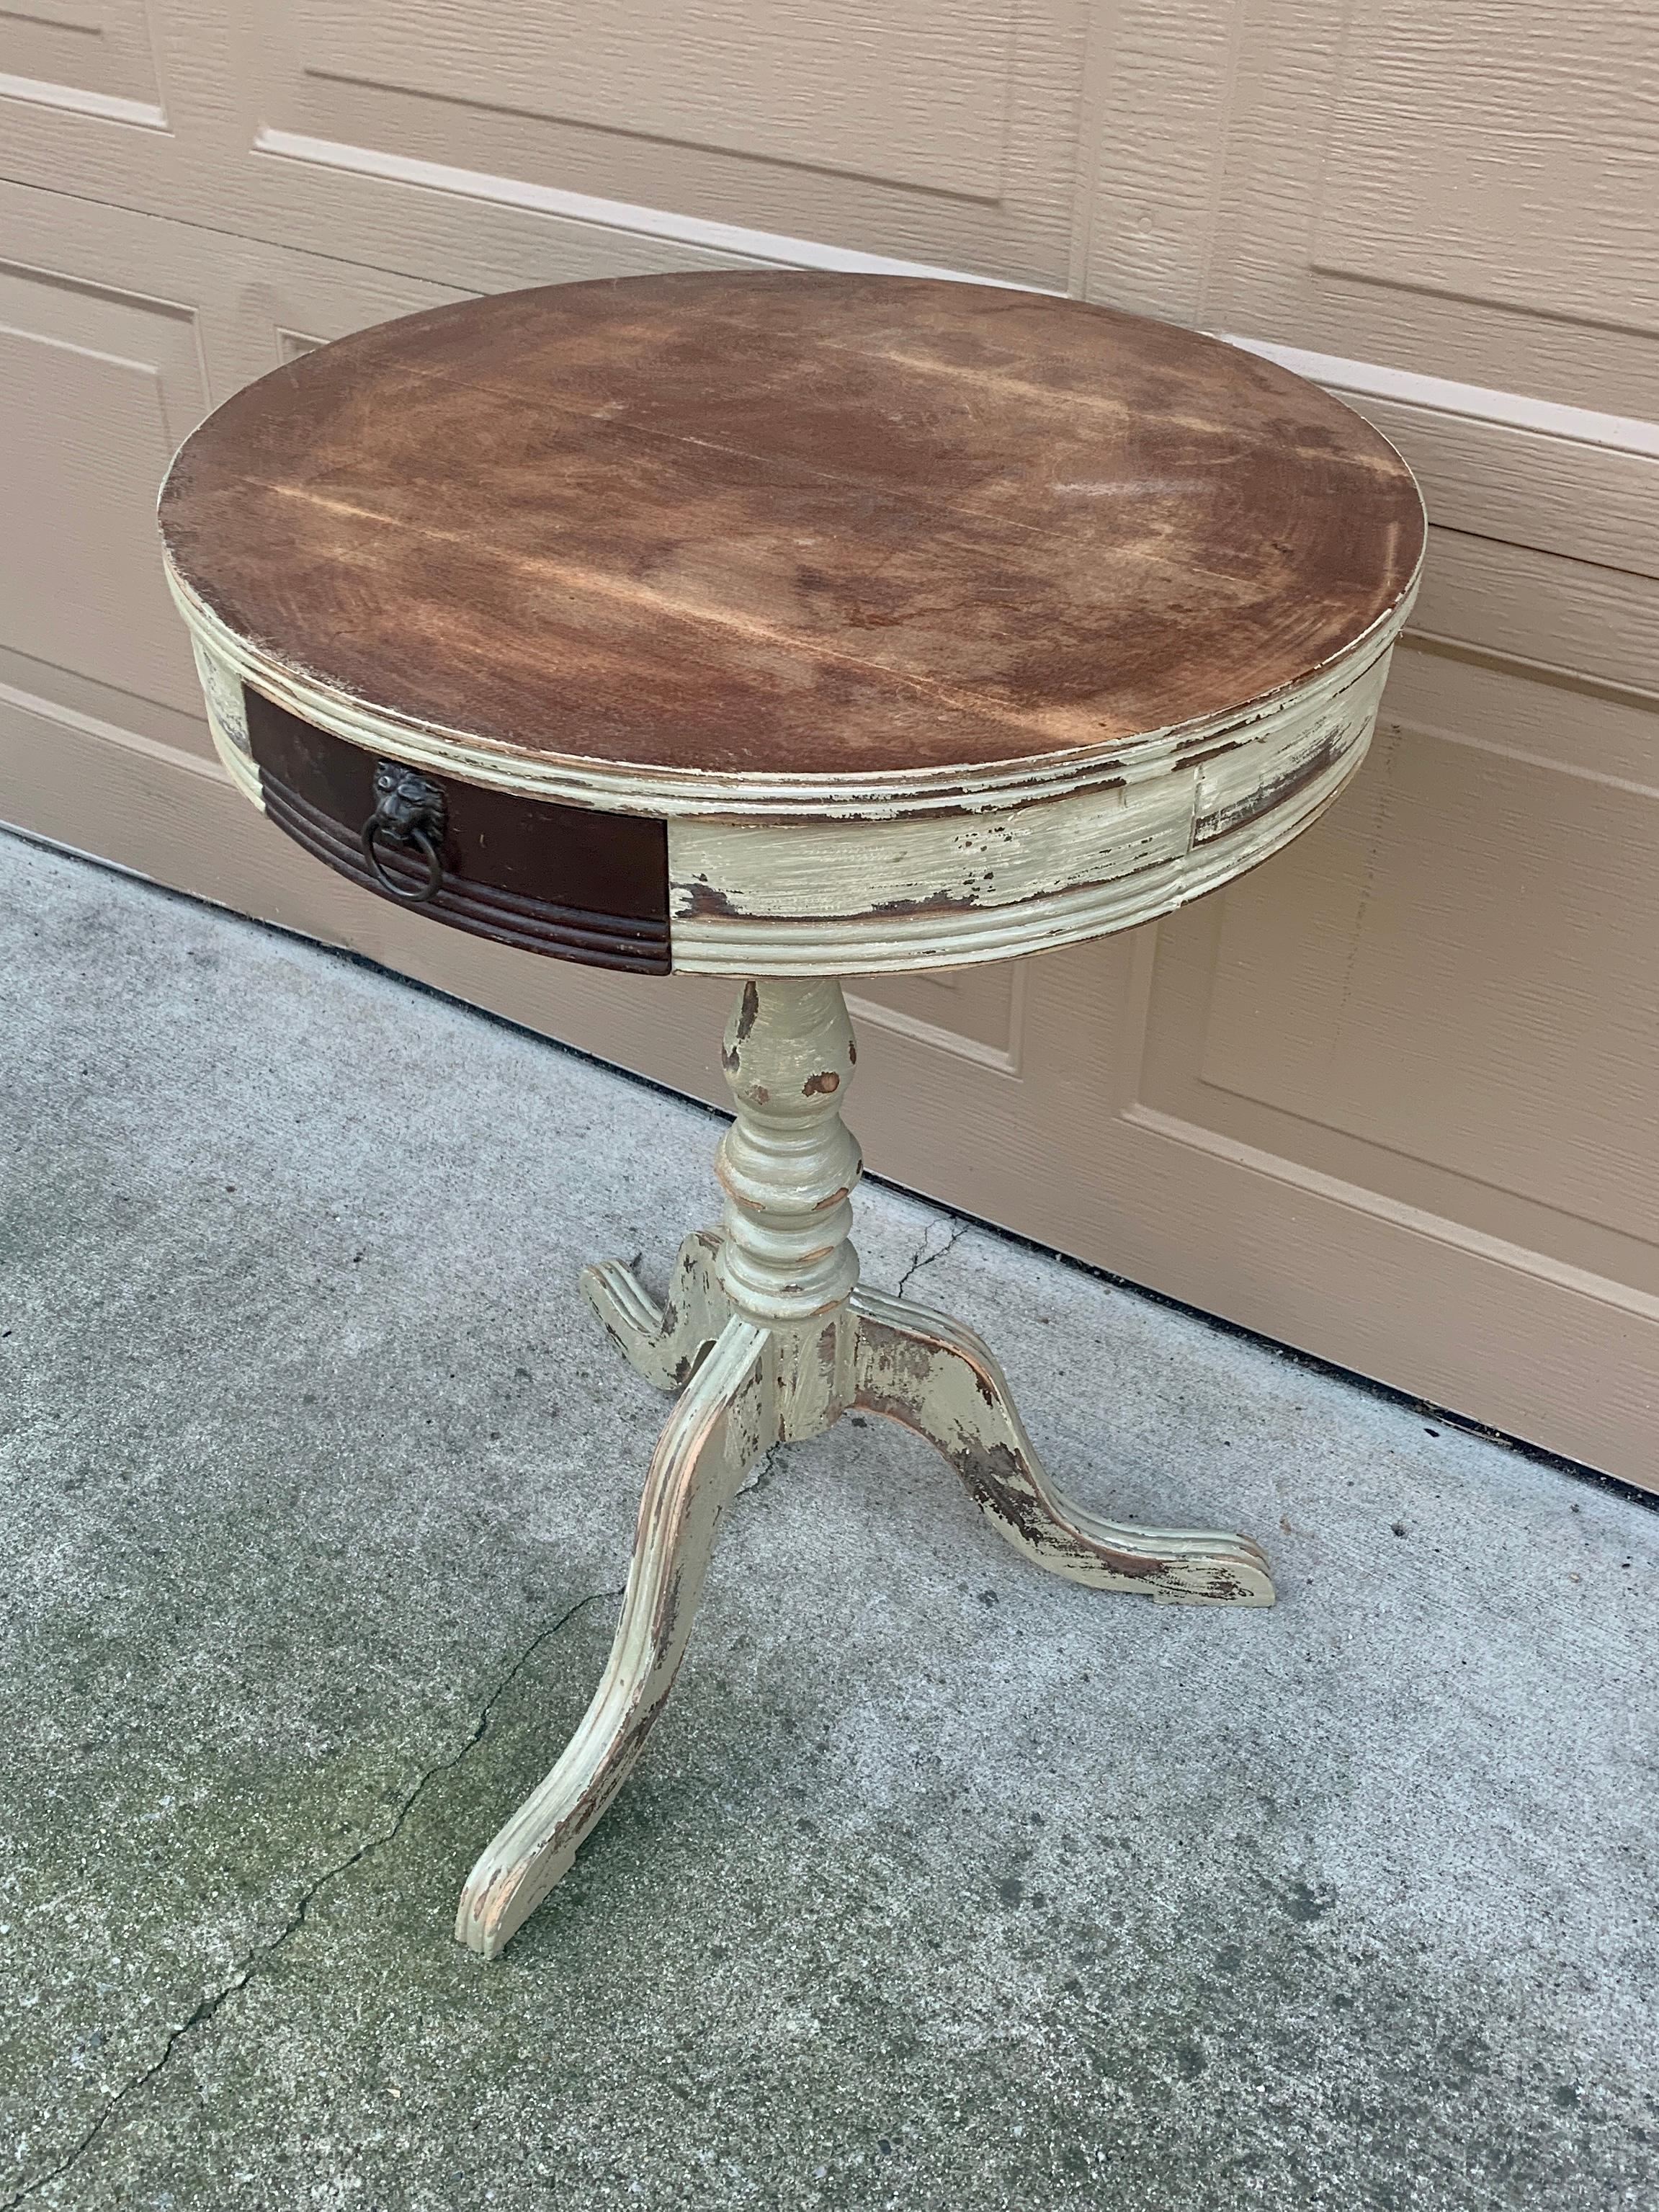 A gorgeous Regency style round one-drawer side table on three legs

USA, Circa late 19th century

Painted walnut, with lion head drawer pull

Measures: 20